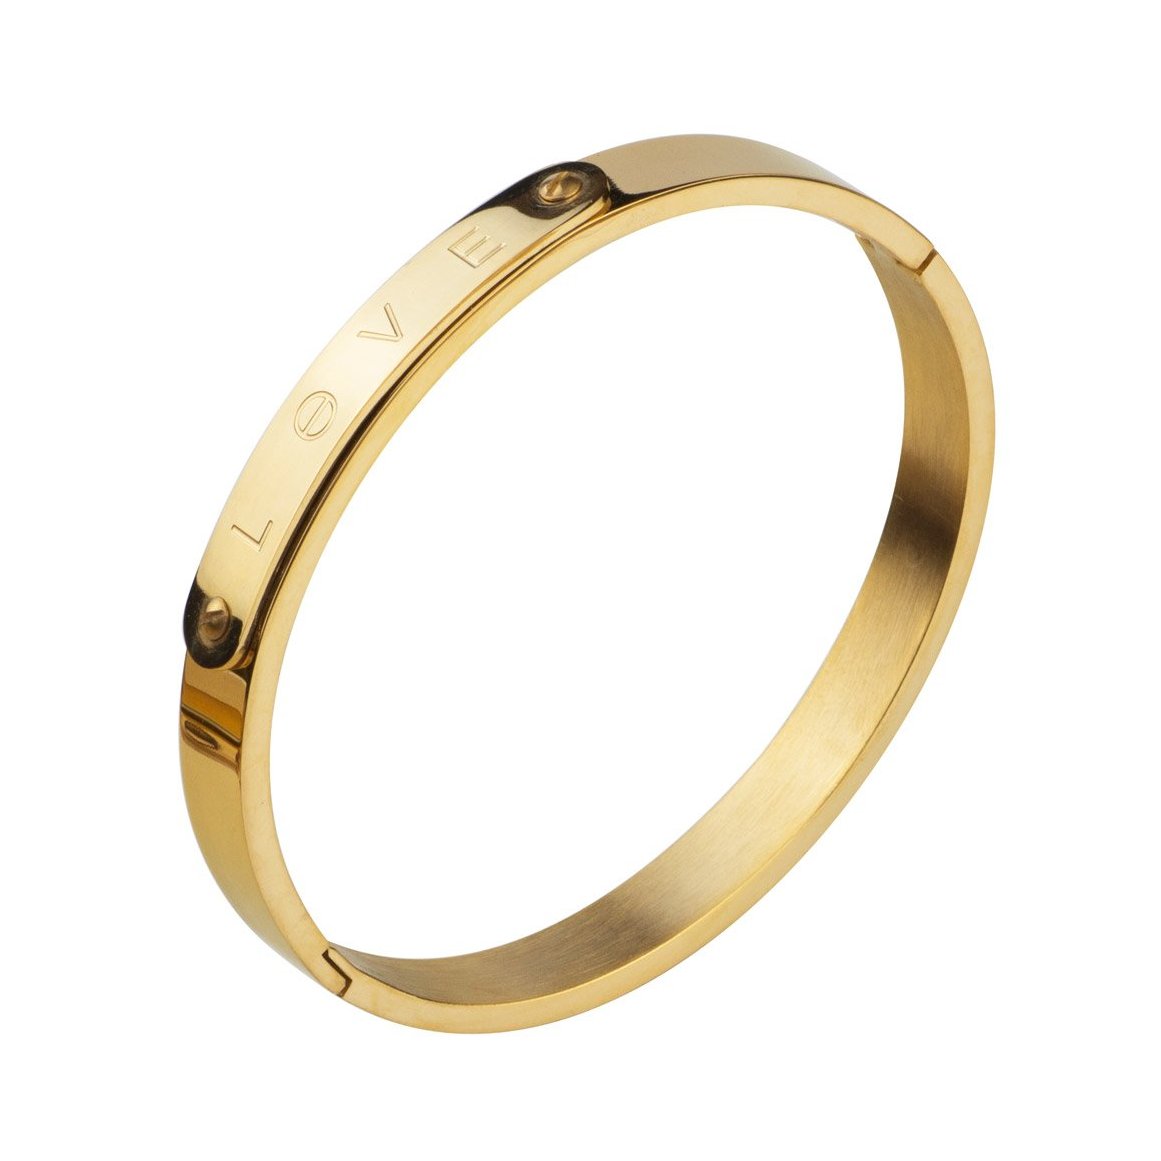 Cartier Love Bracelet Small, review and help with measuring for perfect fit  